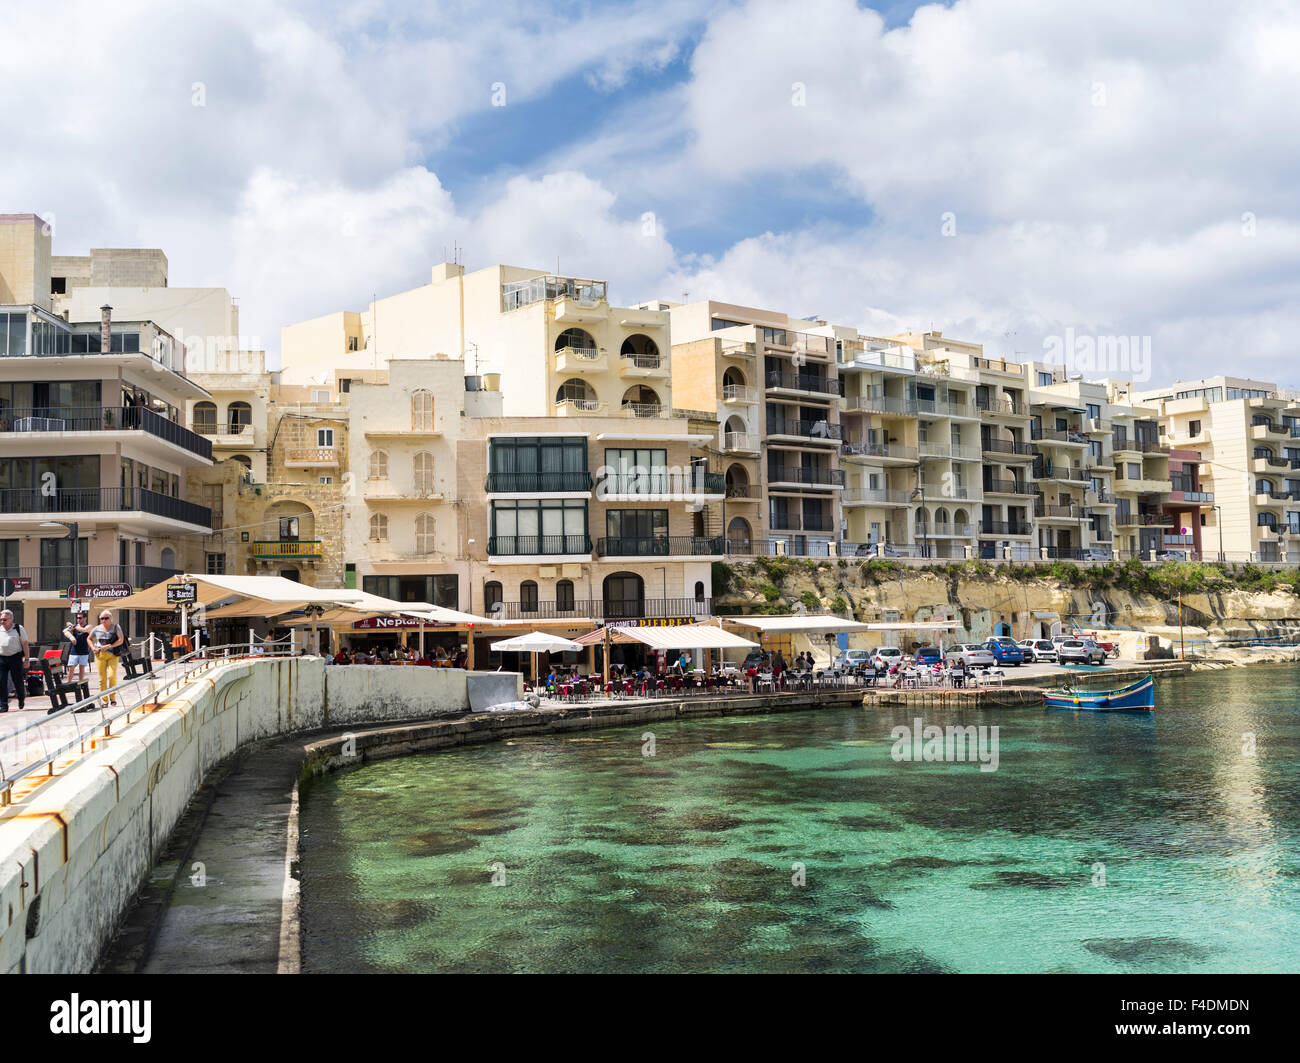 The island of Gozo in the Maltese archipelago. The former fishing village Marsalforn with modern hotel buildings. Europe, Southern Europe, Malta. (Large format sizes available) Stock Photo